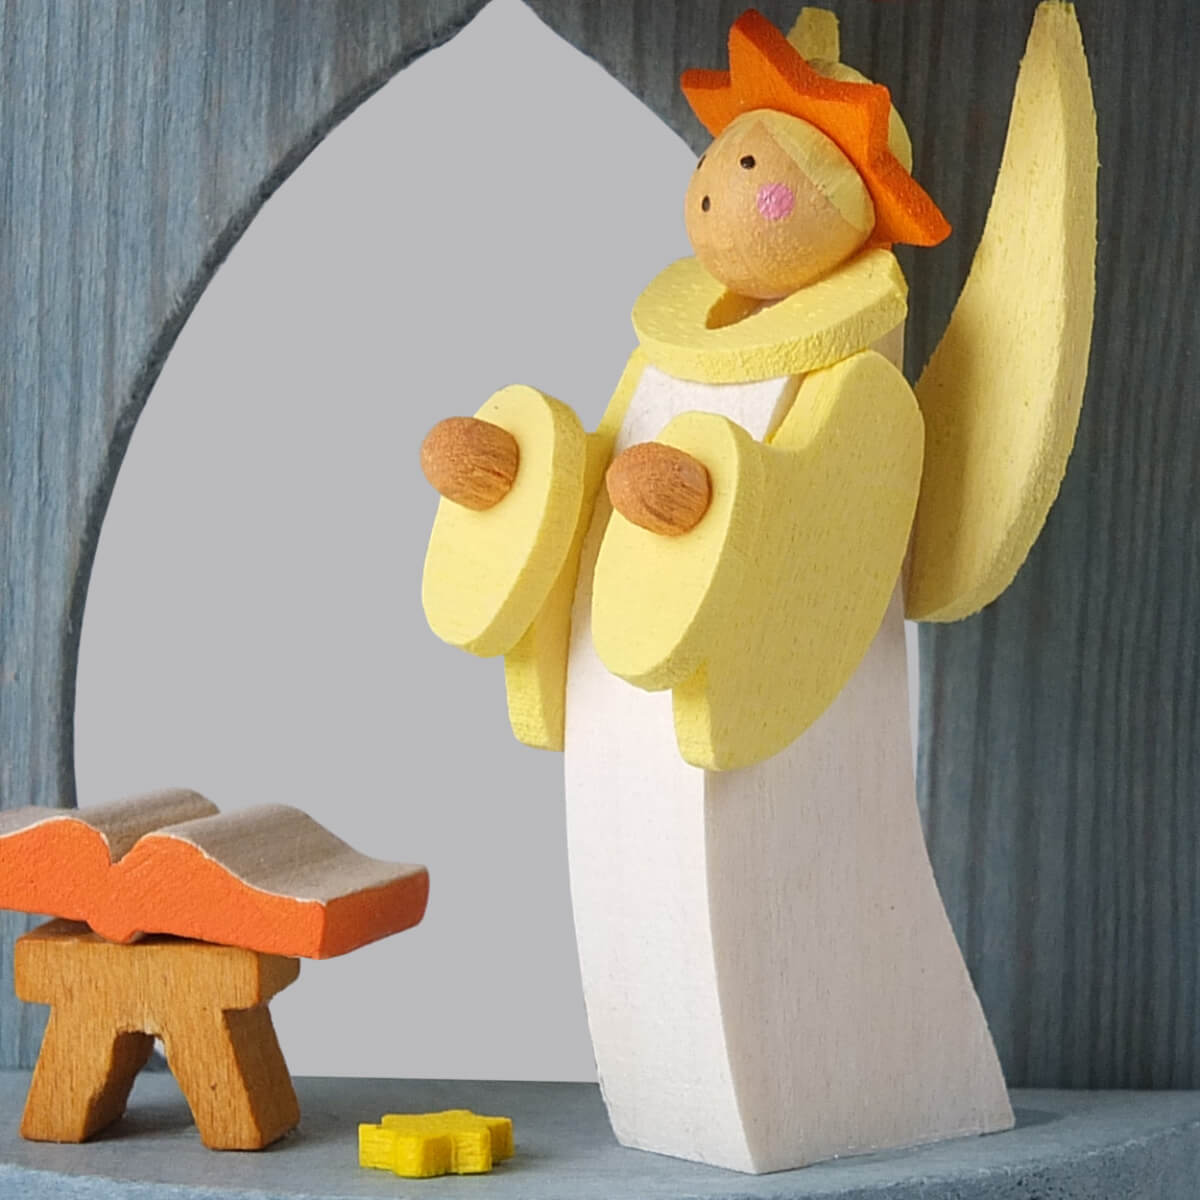 Manger 'The Nativity' Ornament with holy family